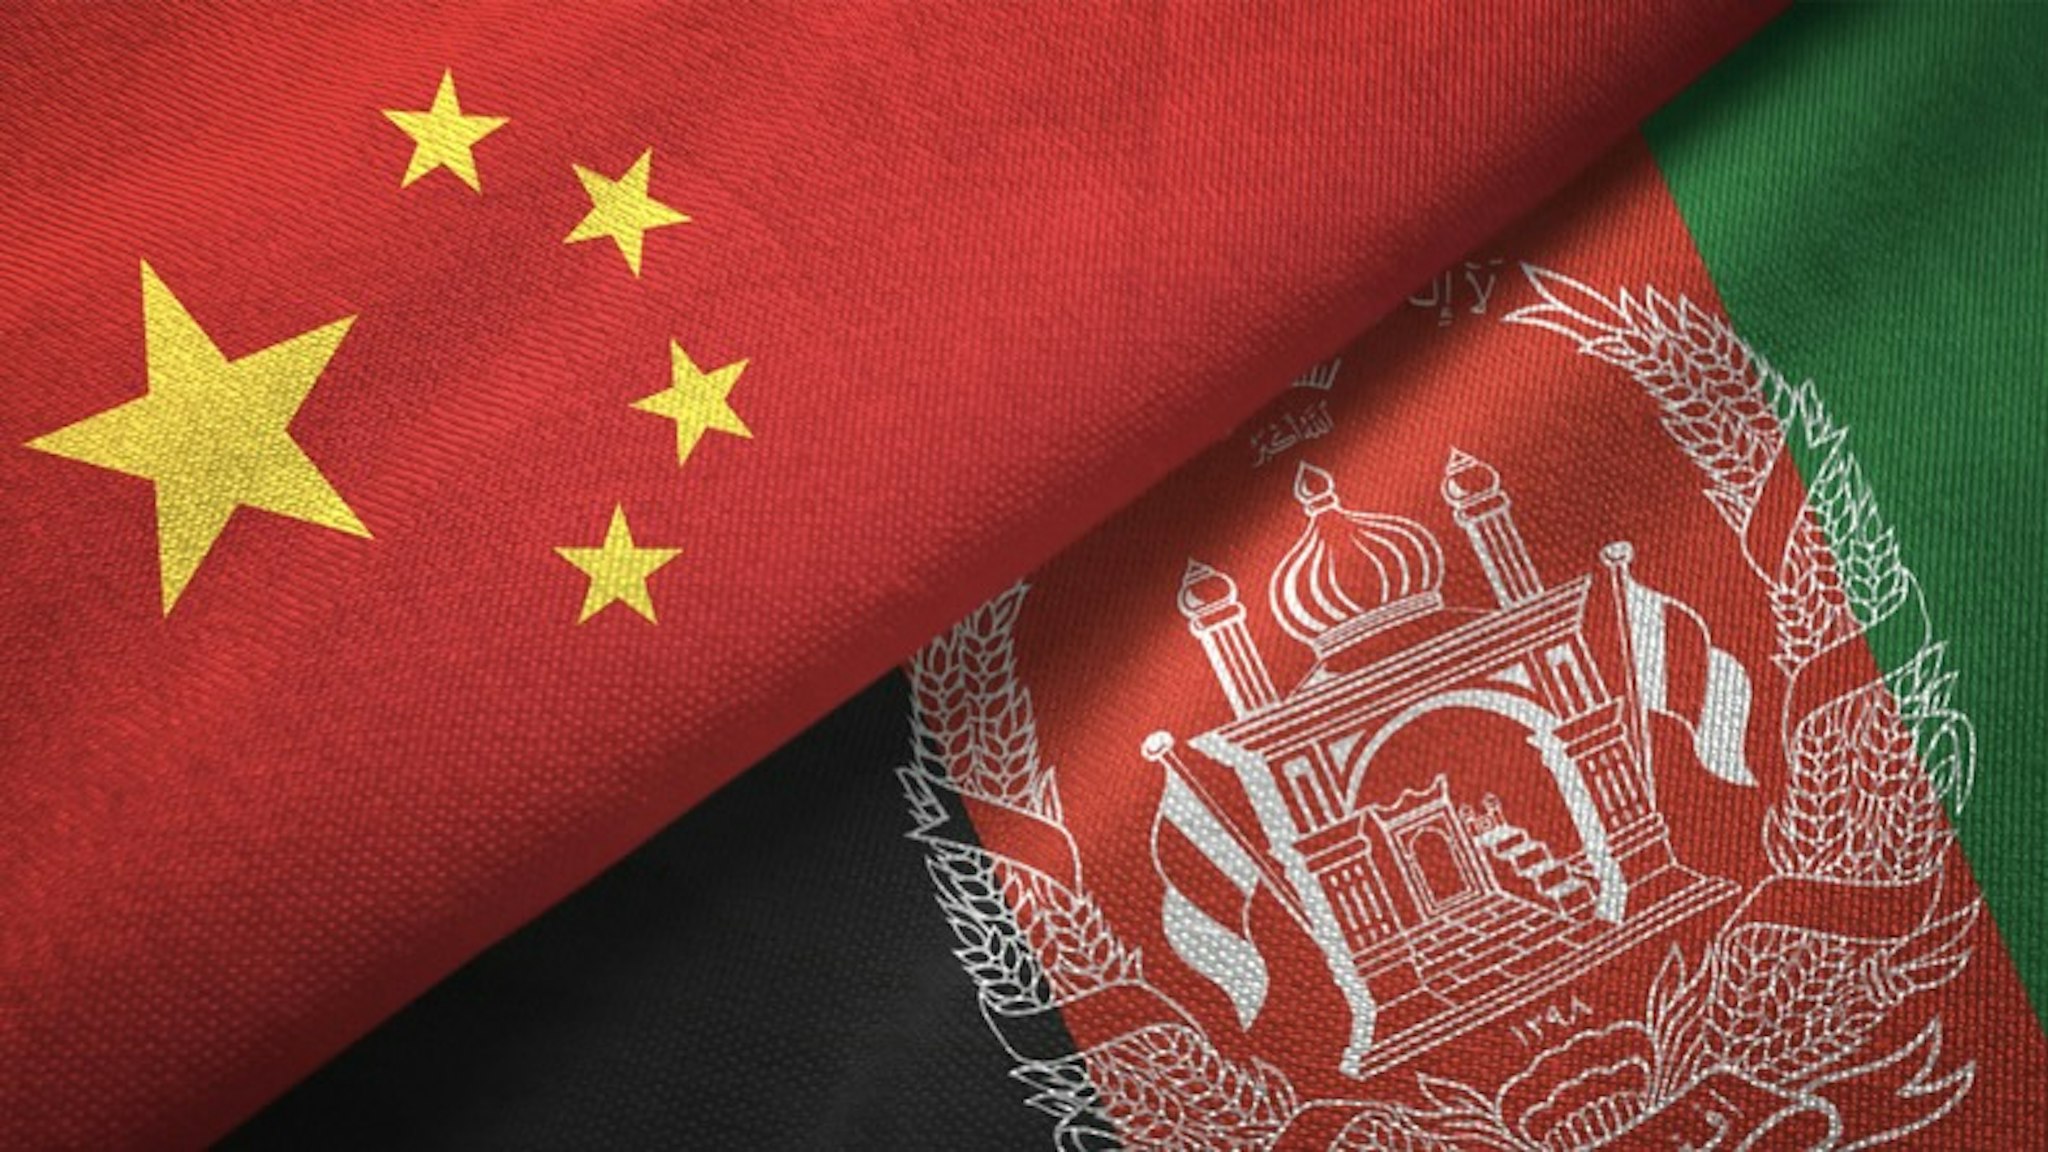 Afghanistan and China two flags together realations textile cloth fabric texture - stock photo Afghanistan and China flag together realtions textile cloth fabric texture Oleksii Liskonih via Getty Images